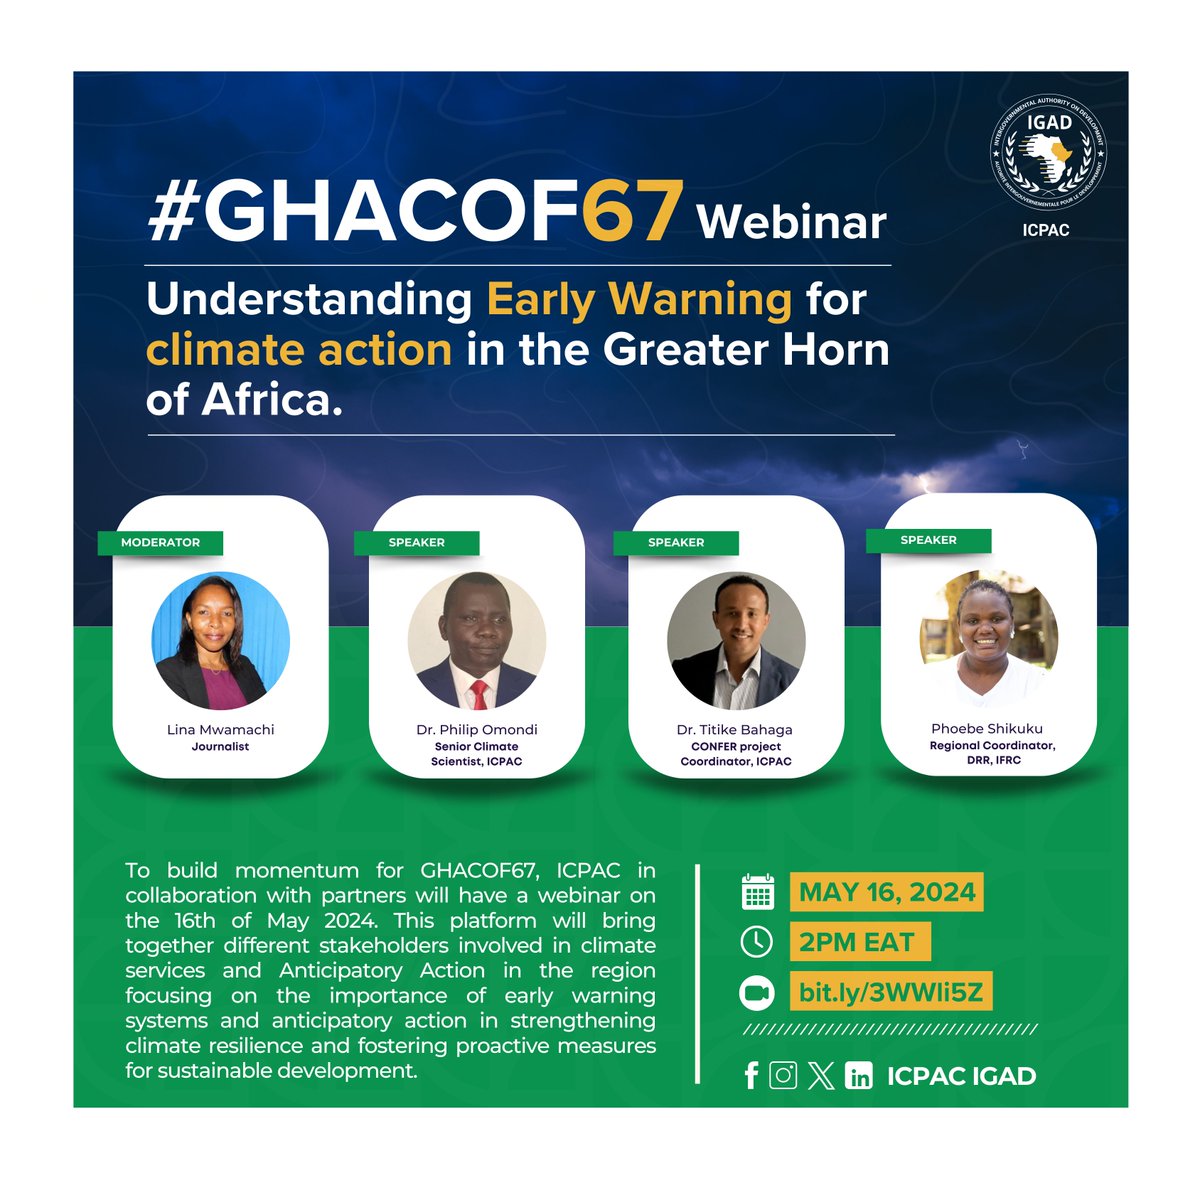 🔔 A reminder to join us this afternoon for our #GHACOF67 webinar on Understanding #EarlyWarning for #climateaction in the Greater #HornofAfrica. 🕑 14:00-15:00 (EAT) 💻 Virtual Register here ➡️ bit.ly/3WWli5Z